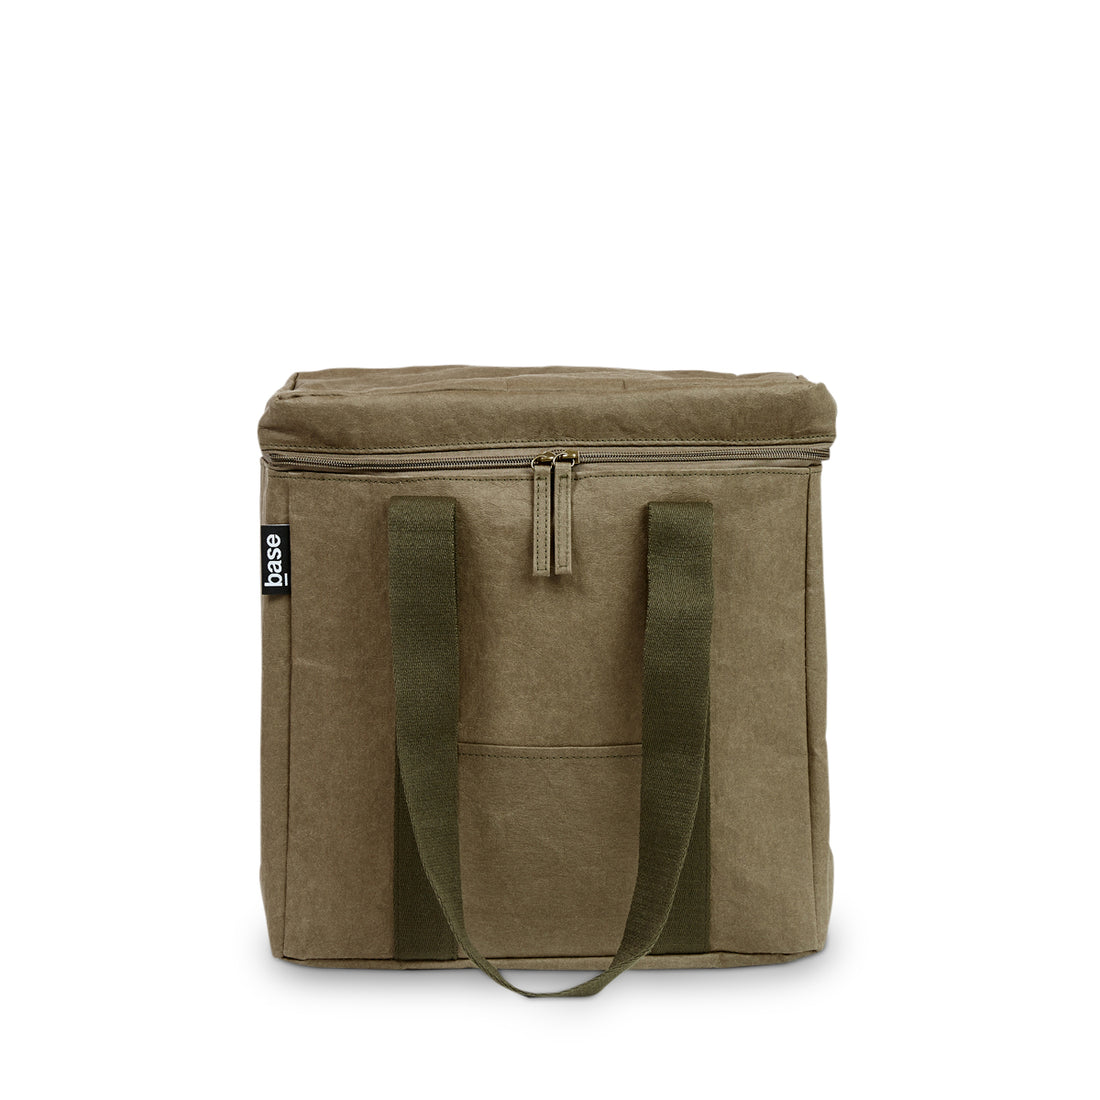 Cooler bag in Khaki from front